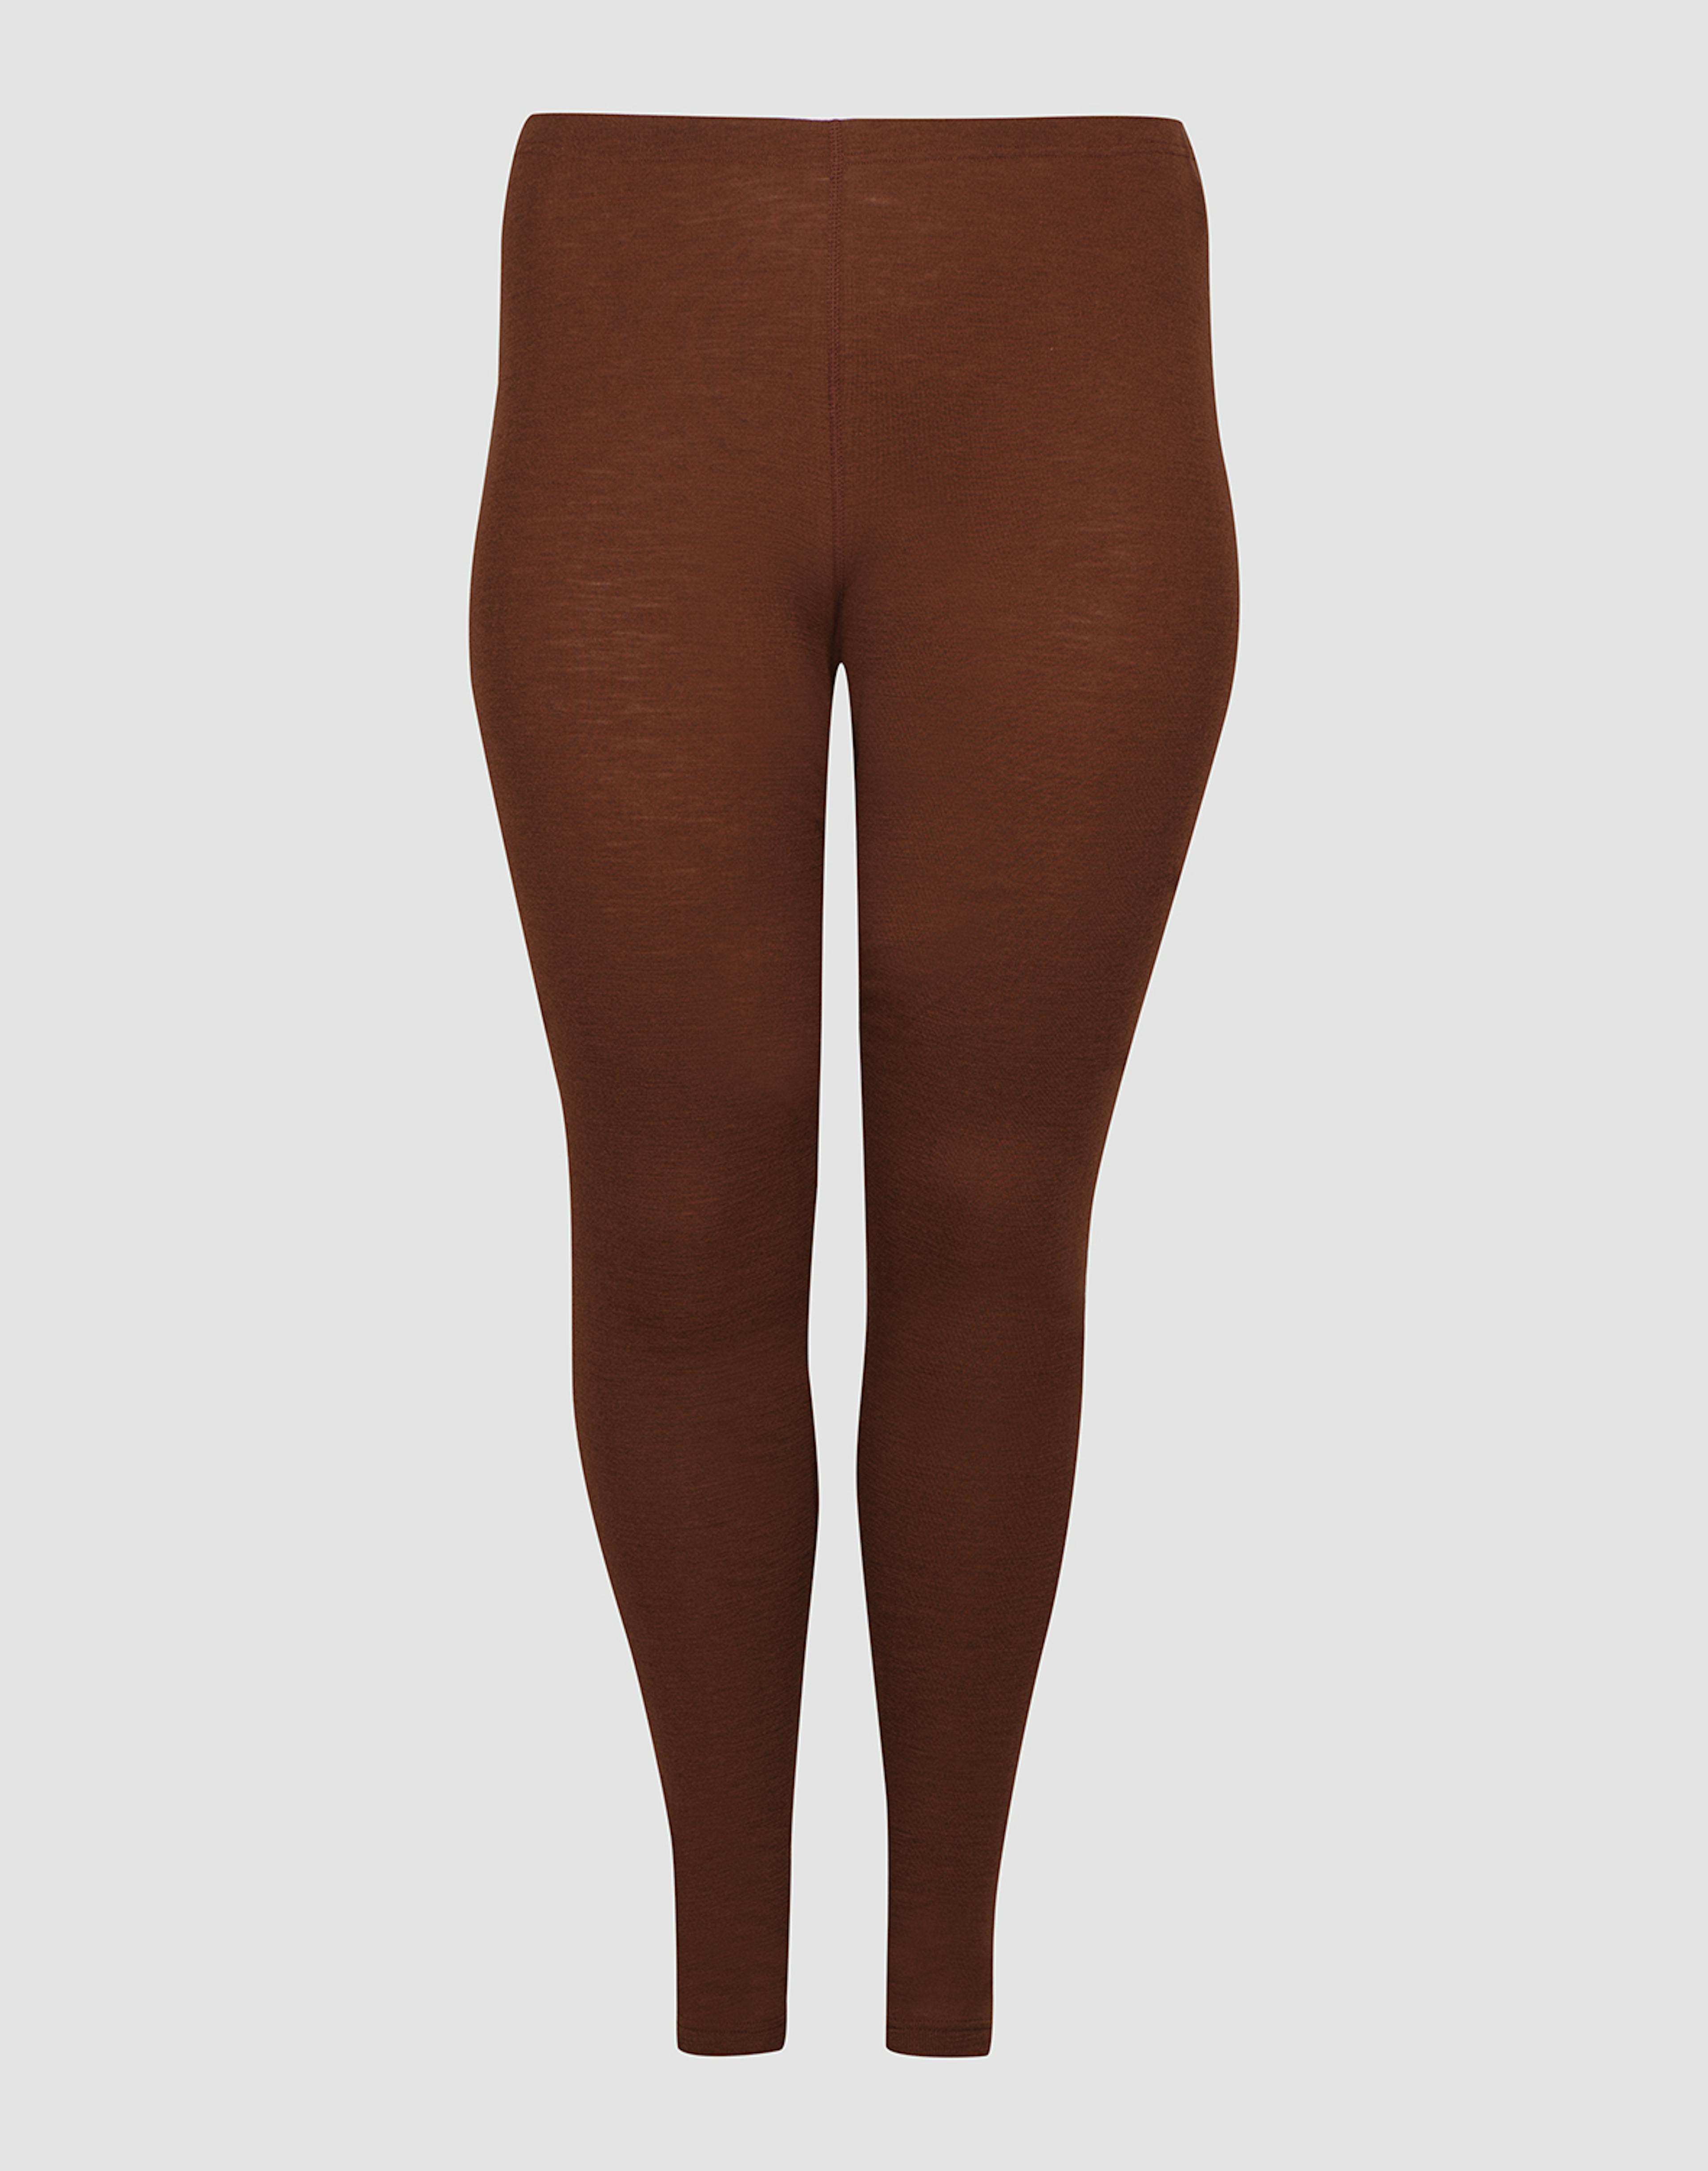 Merino wool leggings for women – soft and exquisite - Dilling